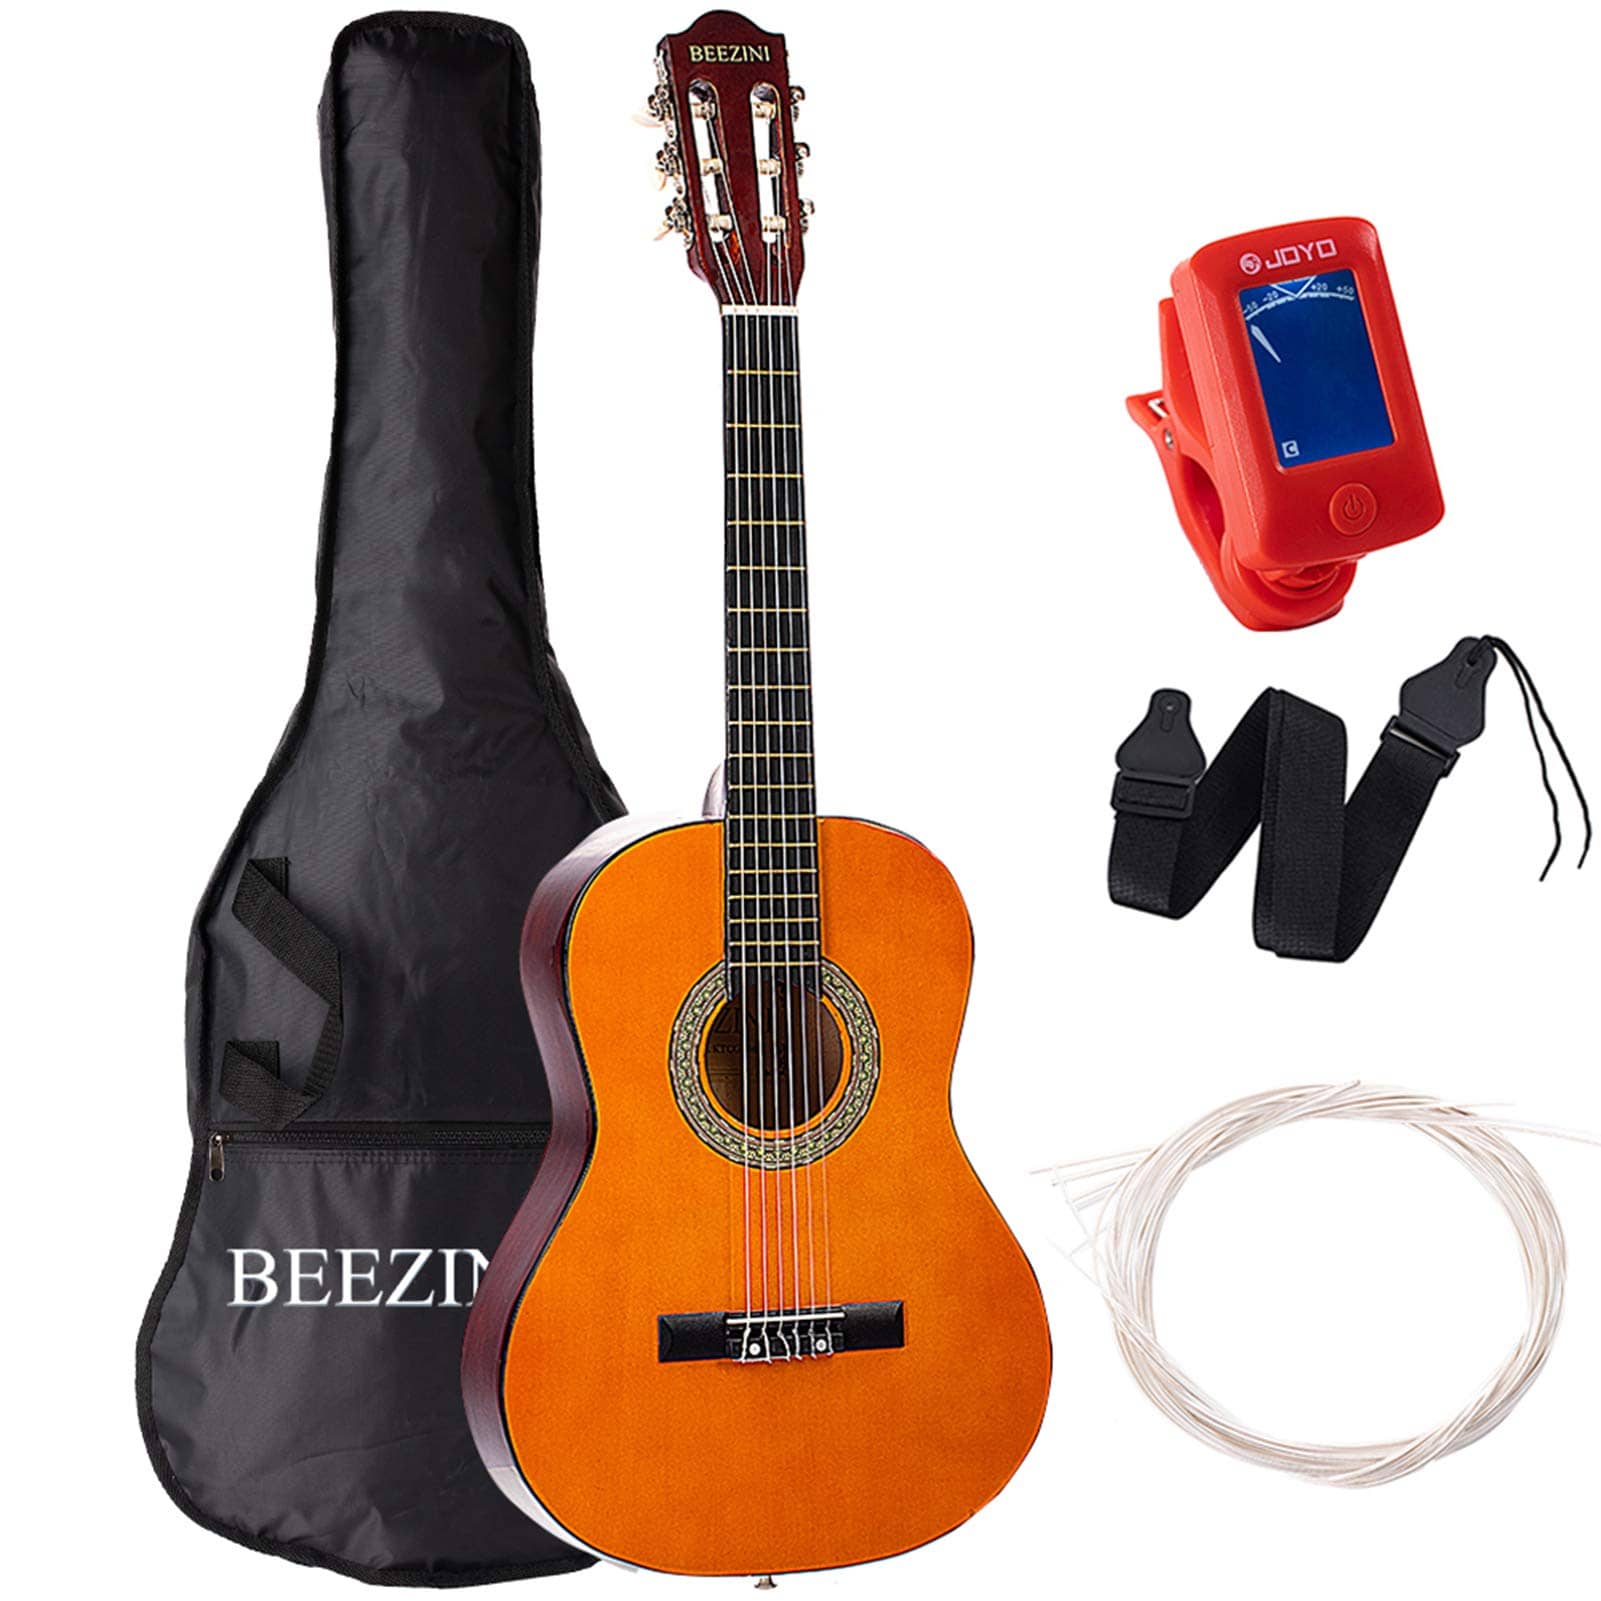 Classical Guitar Acoustic 3/4 Size 36 inch Guitar 6 Nylon Strings Guitar for Beginners Junior Kids Starter Kits with Waterproof Bag Guitar Clip Tuner Strap Extra Strings 8